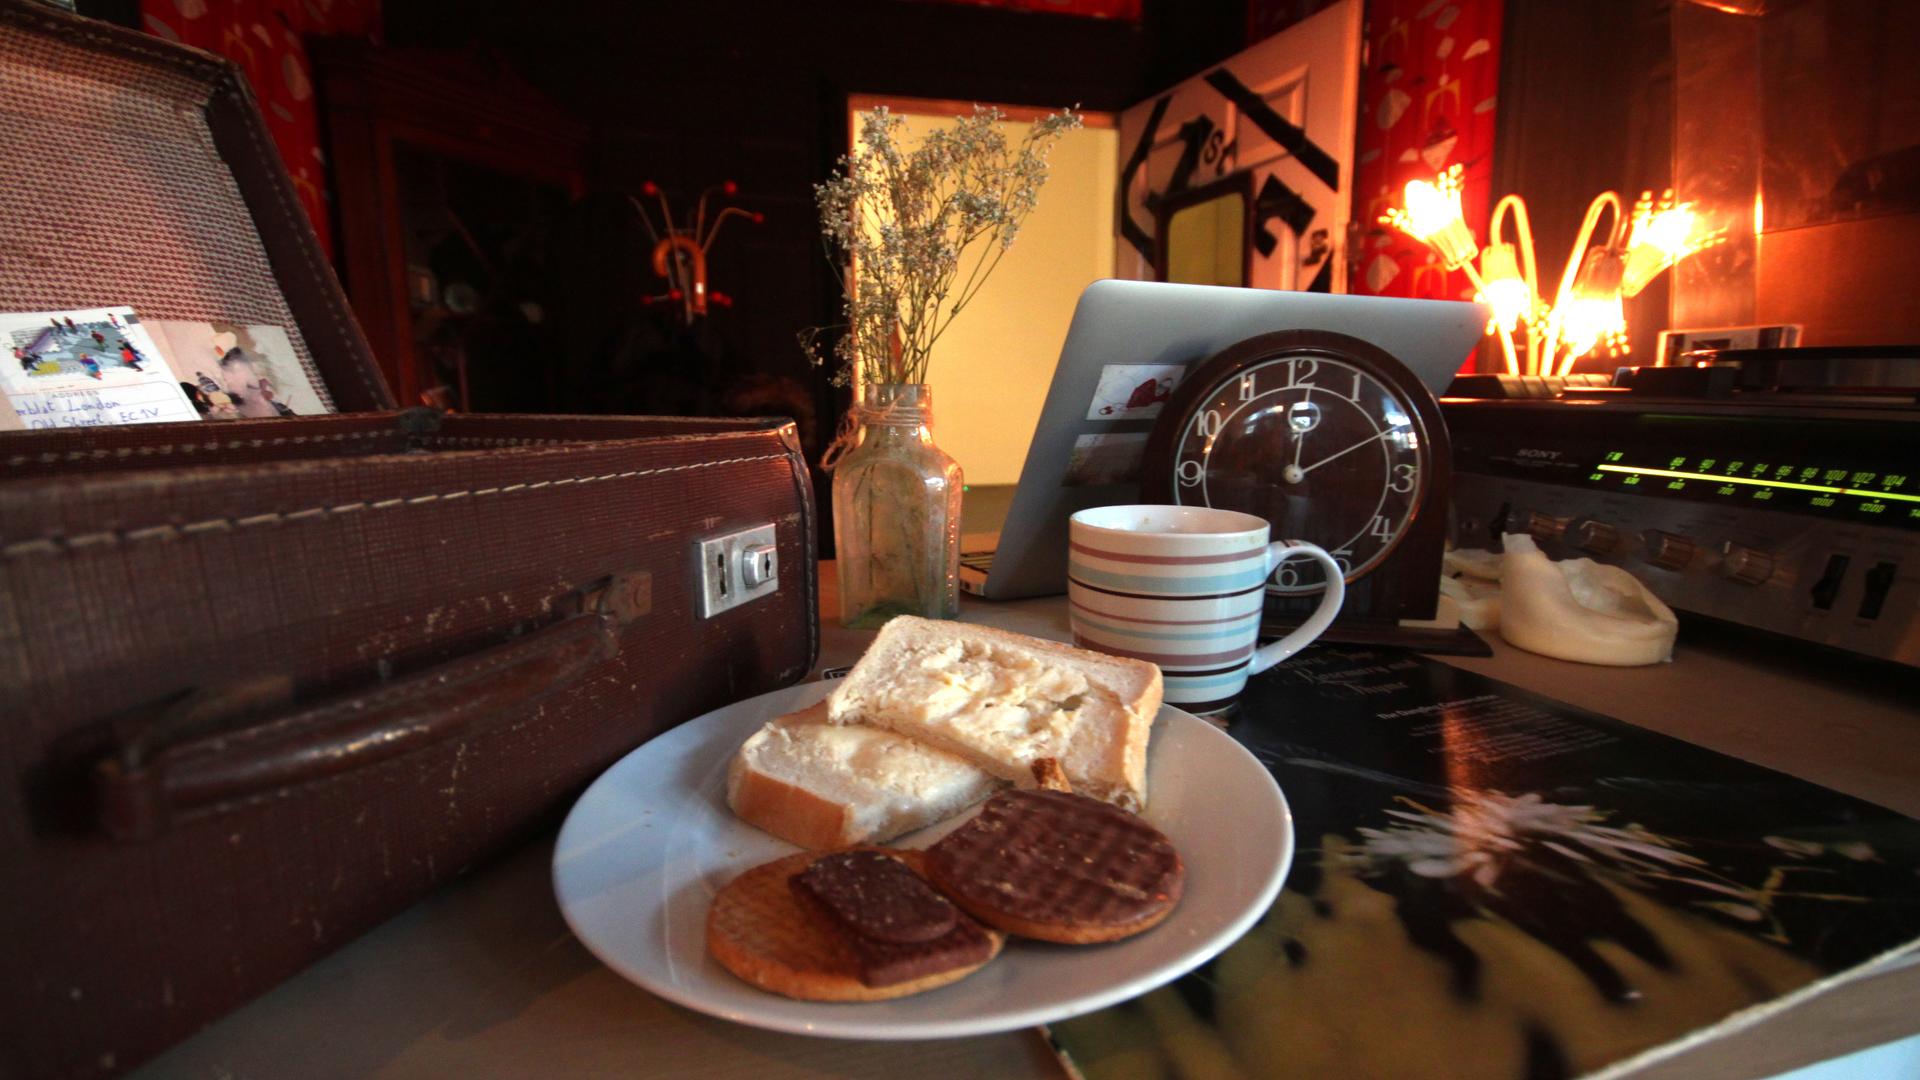 The coffee, toast and biscuits are free at Ziferblat Cafe. You pay for the time spent there.